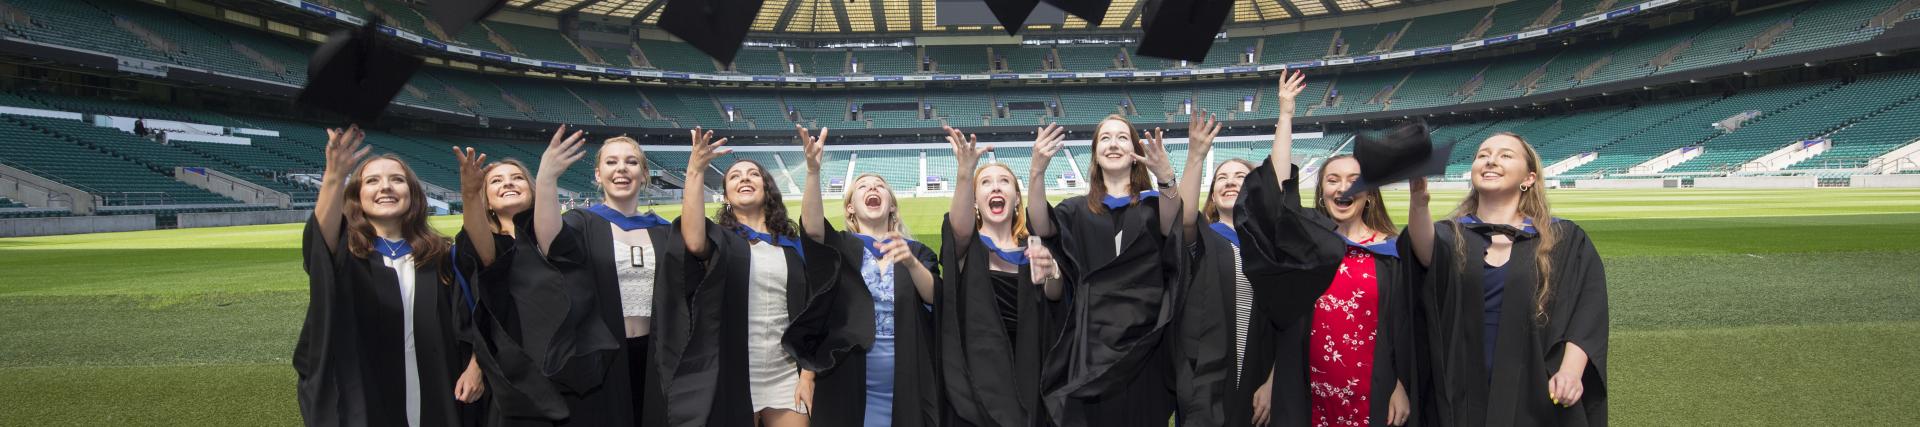 A group of graduates throwing their mortarboard hats in the air at Twickenham Stadium.